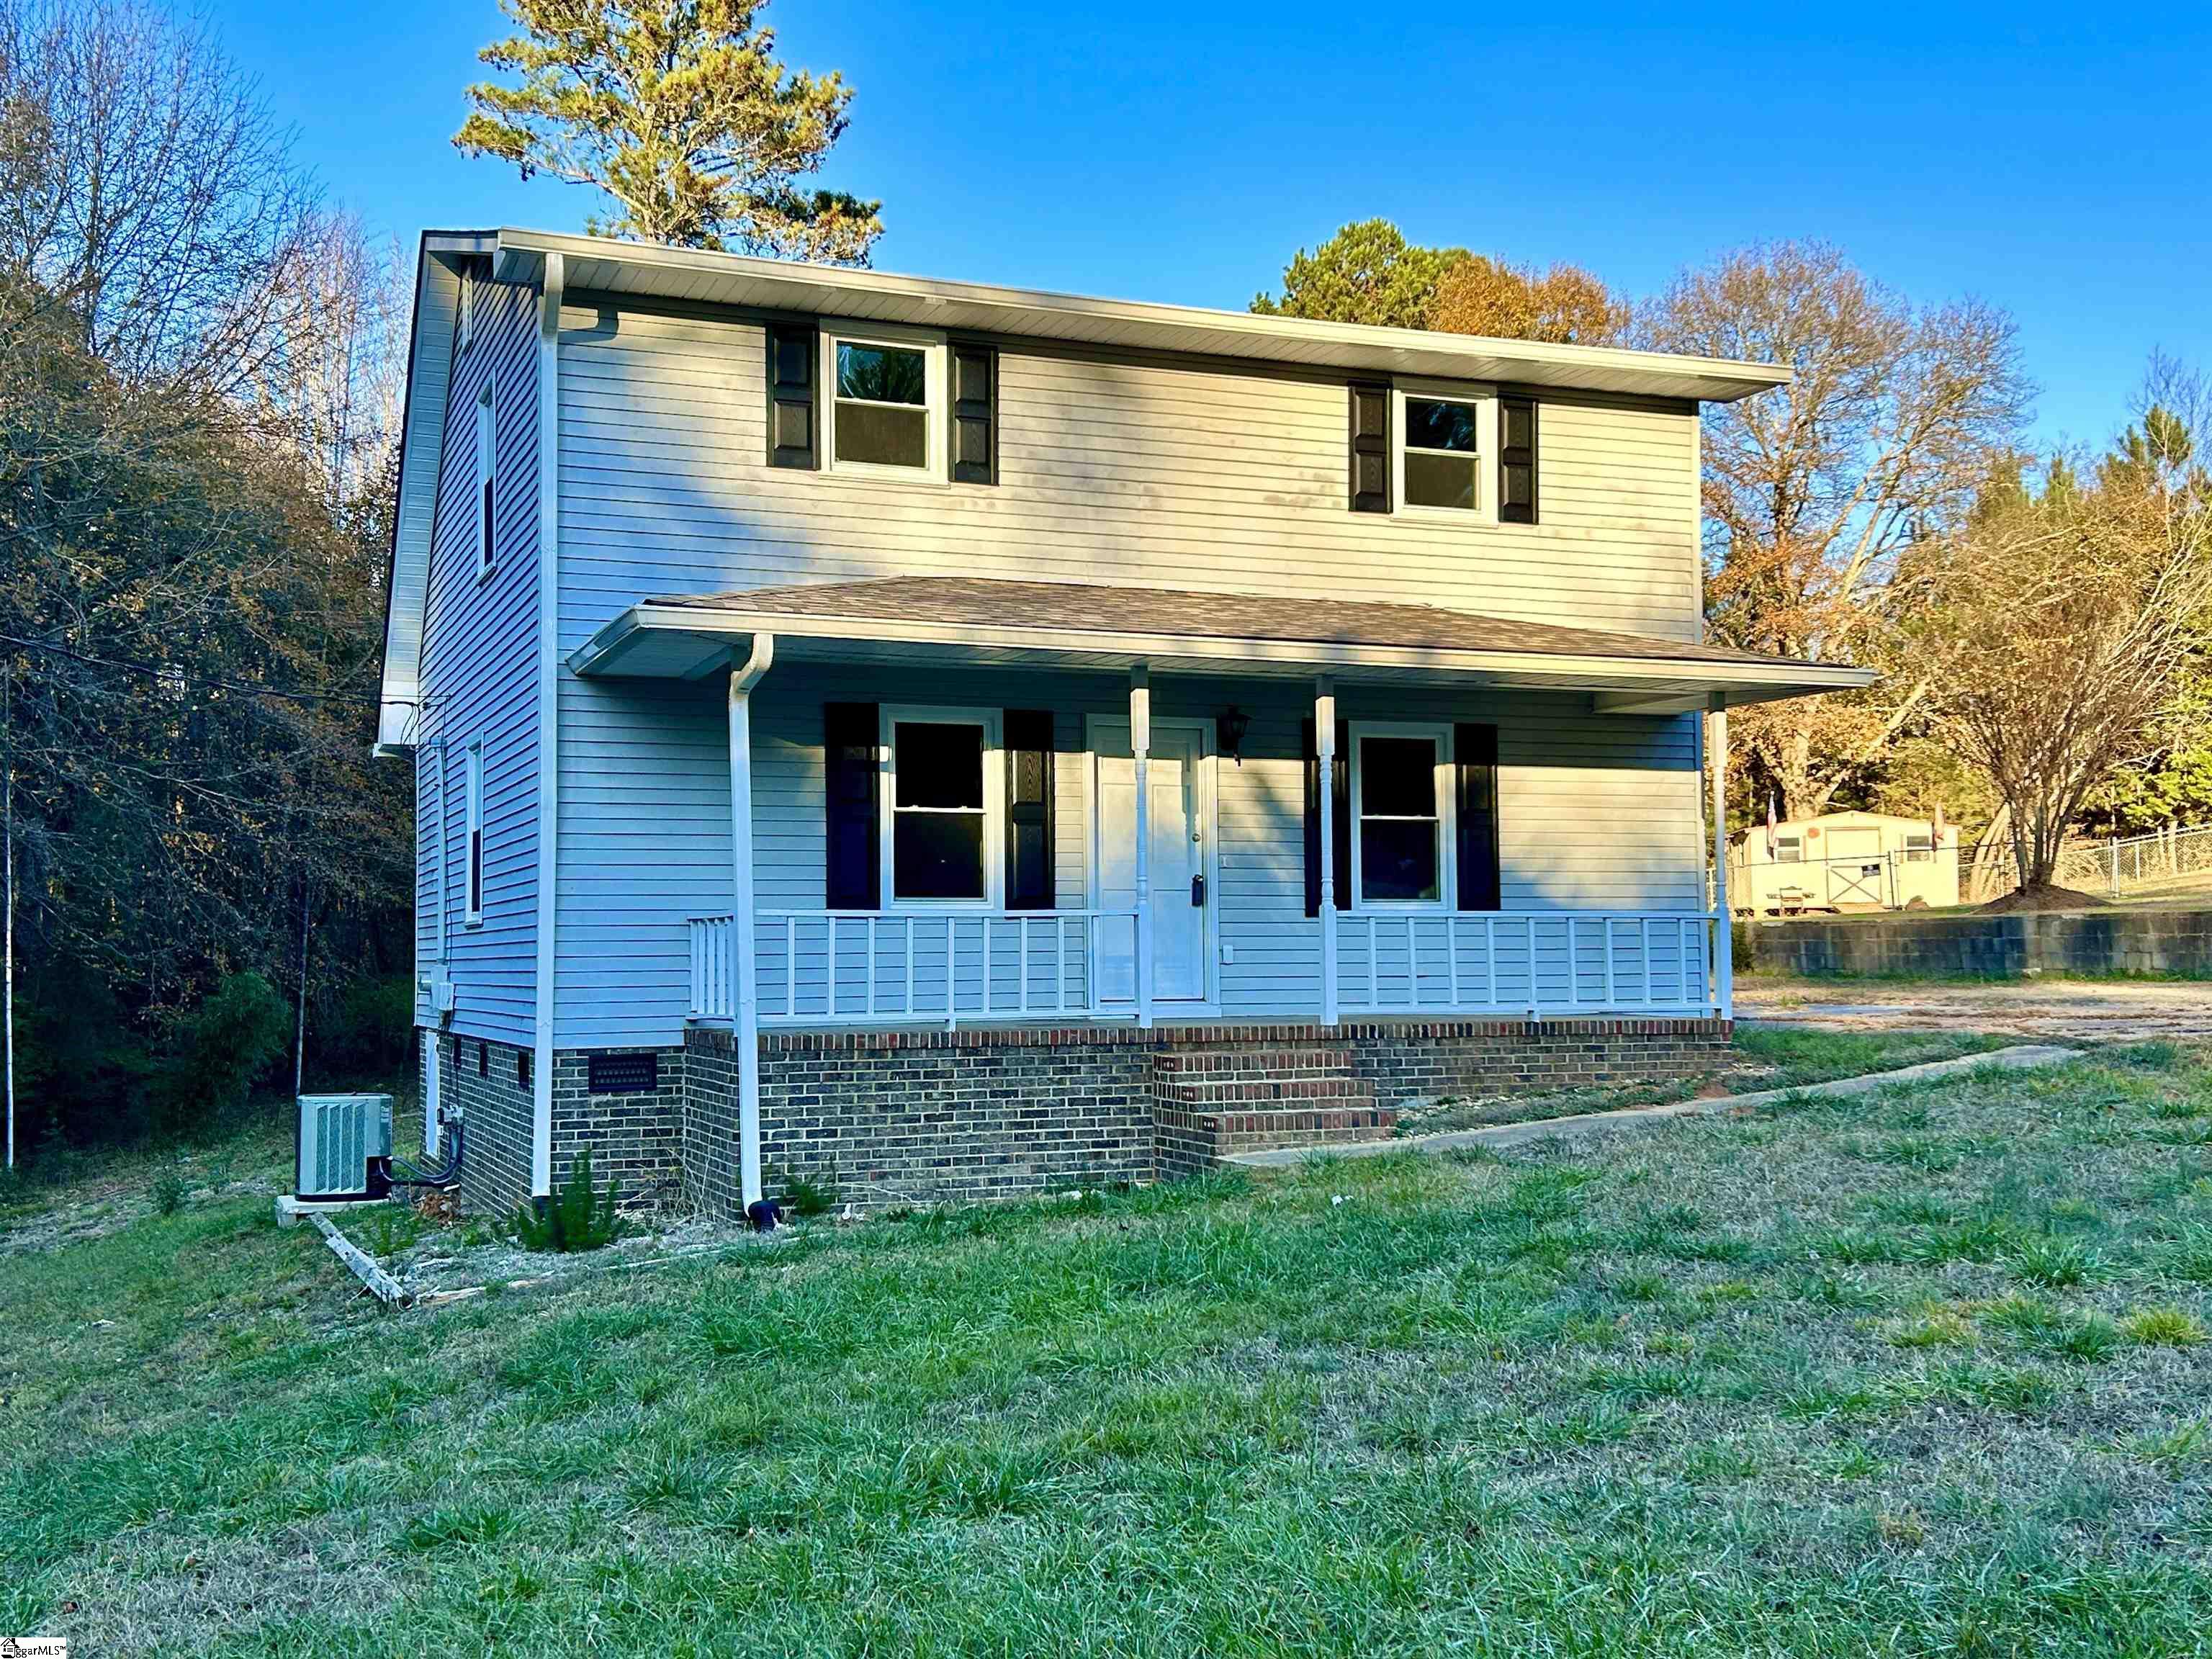 Come see this freshly updated home located in Anderson School District One, Williamston SC! 109 Branchview Drive is located in a small developed neighborhood at the end of a quiet street. Conveniently located right between Anderson and Greenville with HWY 29 and I85 just minutes away. Walk right into this freshly painted home with new LVP floors throughout the down stairs and new carpet upstairs! The cabinets have been completely refreshed and has new countertops. Brand new stove in the kitchen. This home has a new deck on the outside ready for entertaining. Roof is less than two years old and had new vinyl windows. A storage room off the back of the house for storing your outside items! A spacious backyard for whatever is needed! There is also a concrete pad with room to put a storage building or a basketball goal.